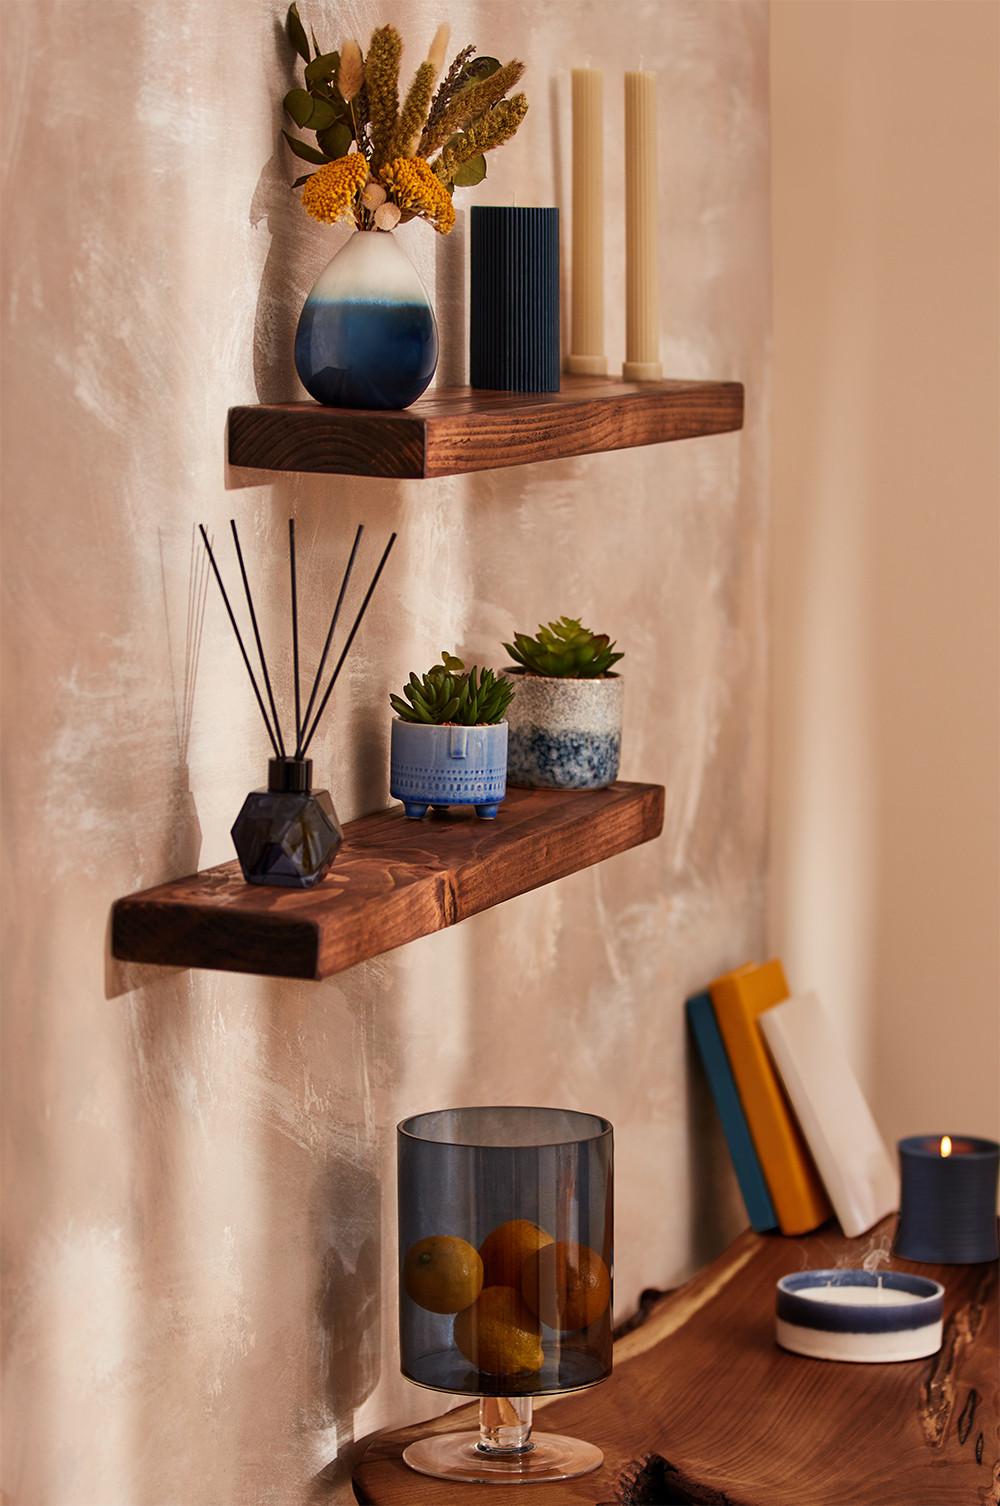 Shelf with a variety of vases, lanterns, candles and more